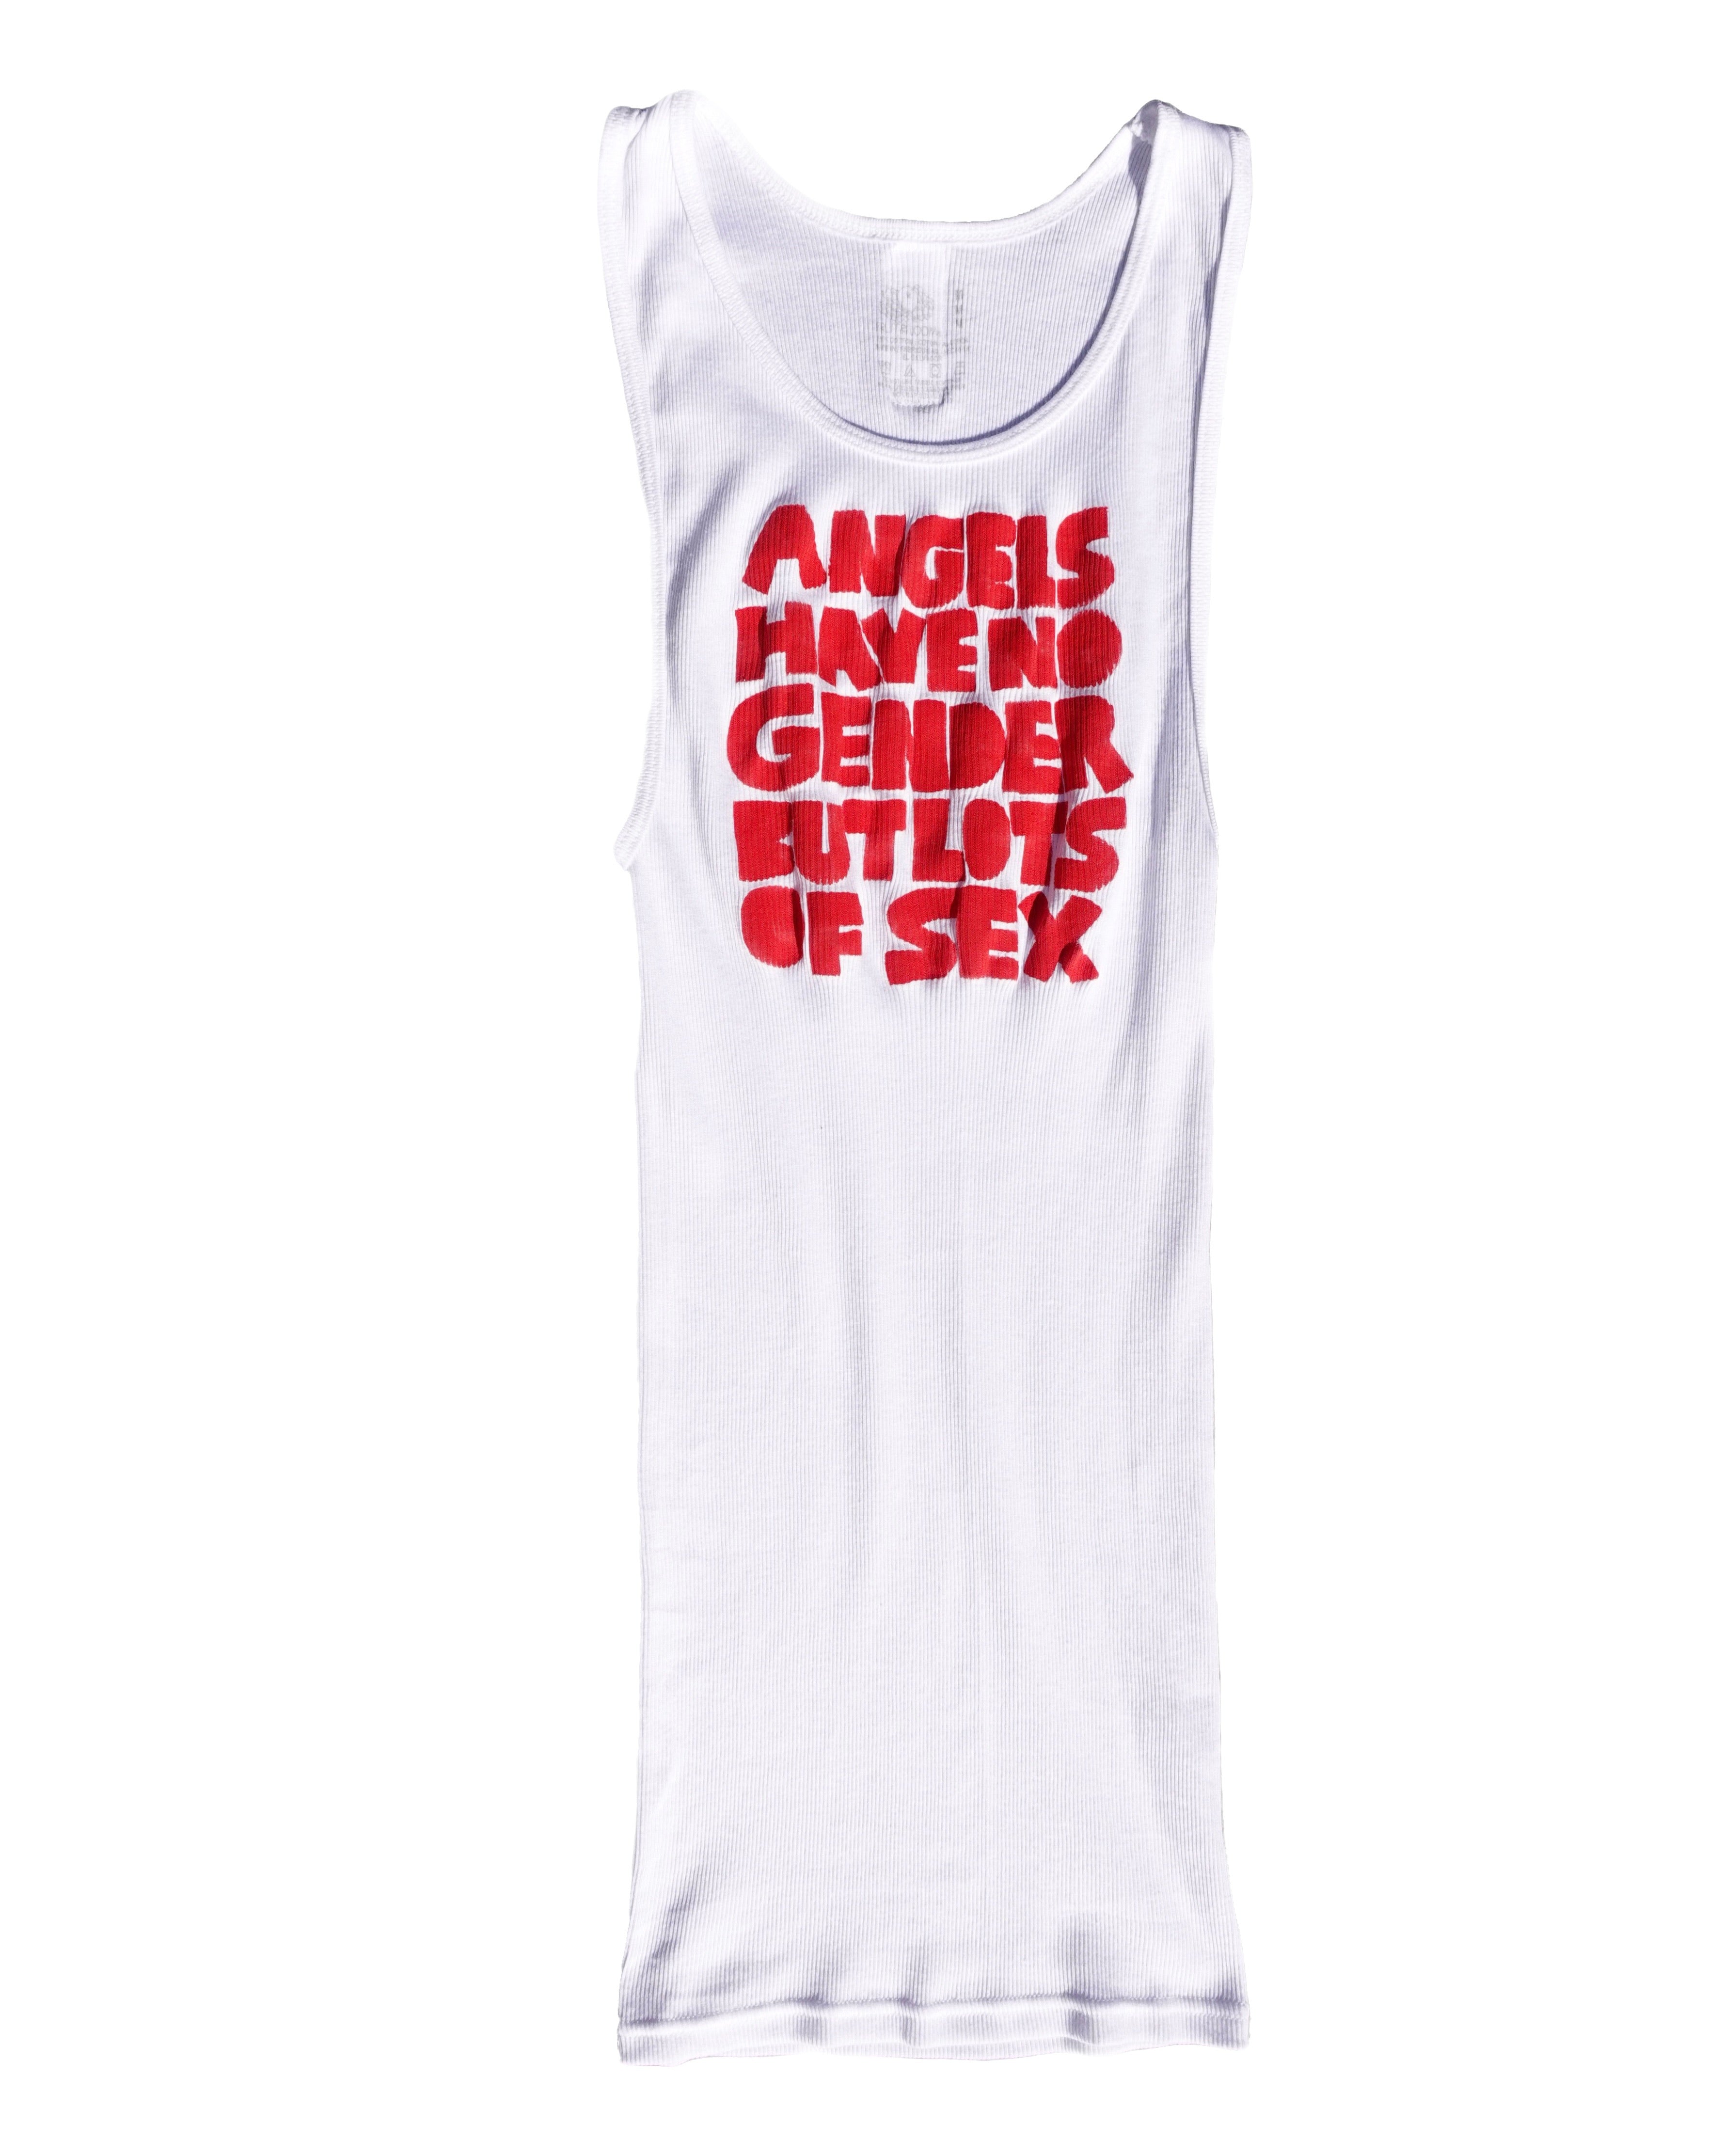 ANGELS HAVE NO GENDER BUT LOTS OF SEX drawn tank top – OFFICIAL REBRAND